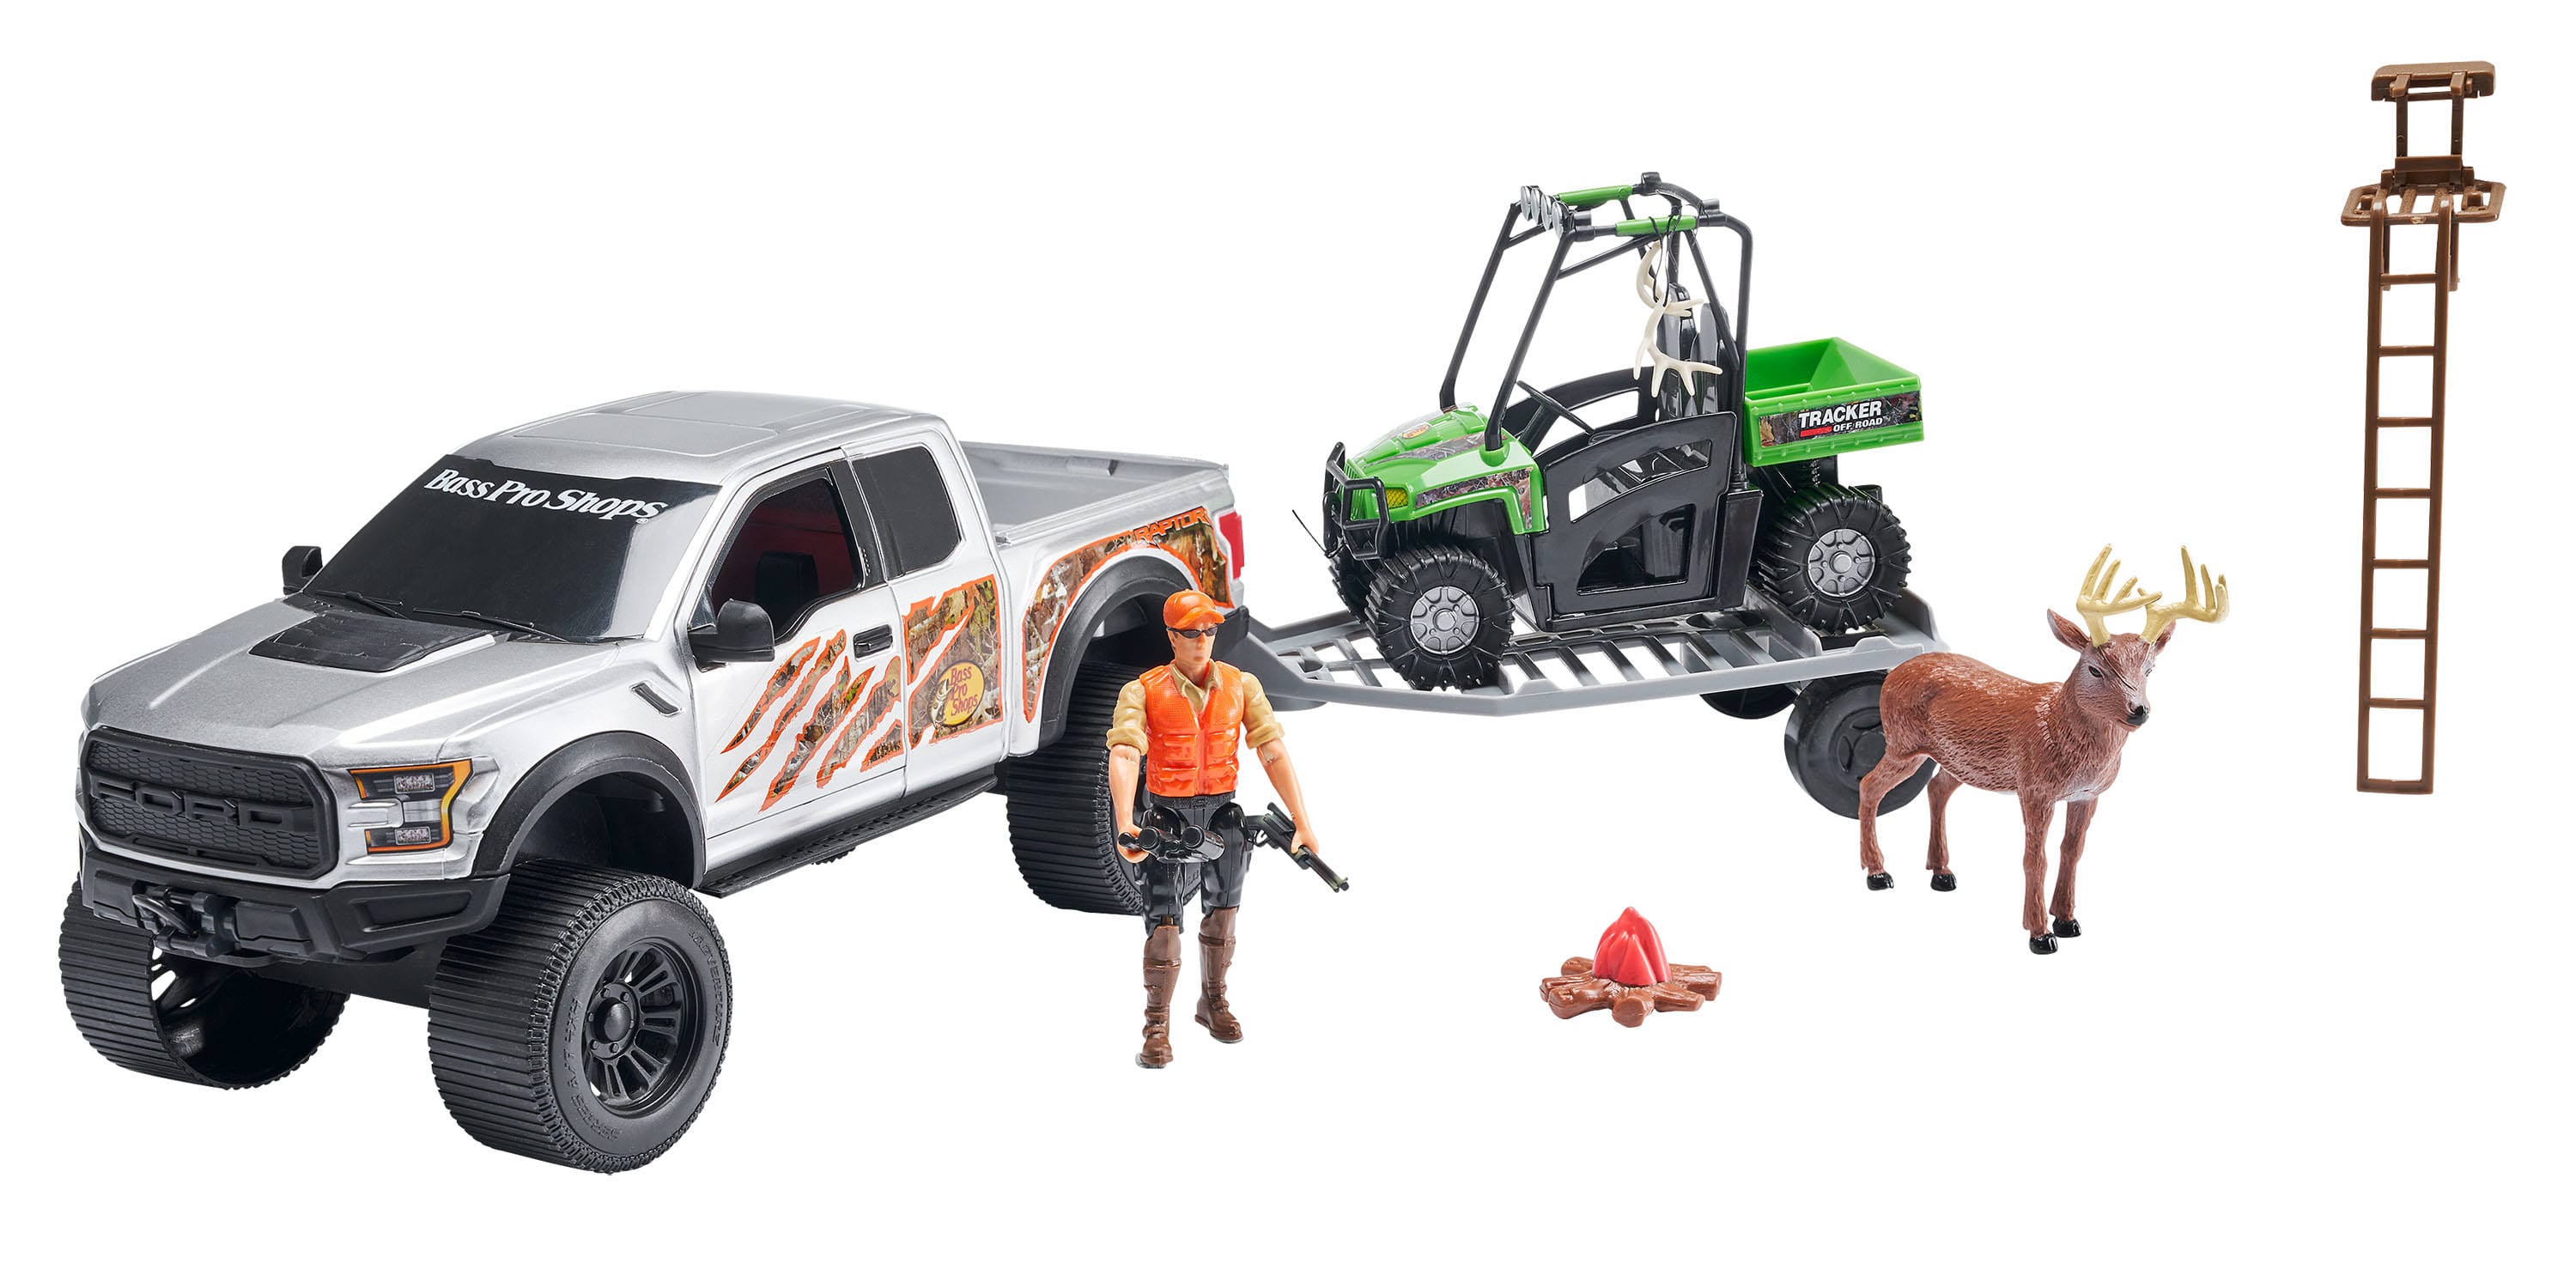 Bass Pro Shops® Deluxe Licensed Ford® Raptor TrueTimber® Camo Adventure Truck Playset for Kids